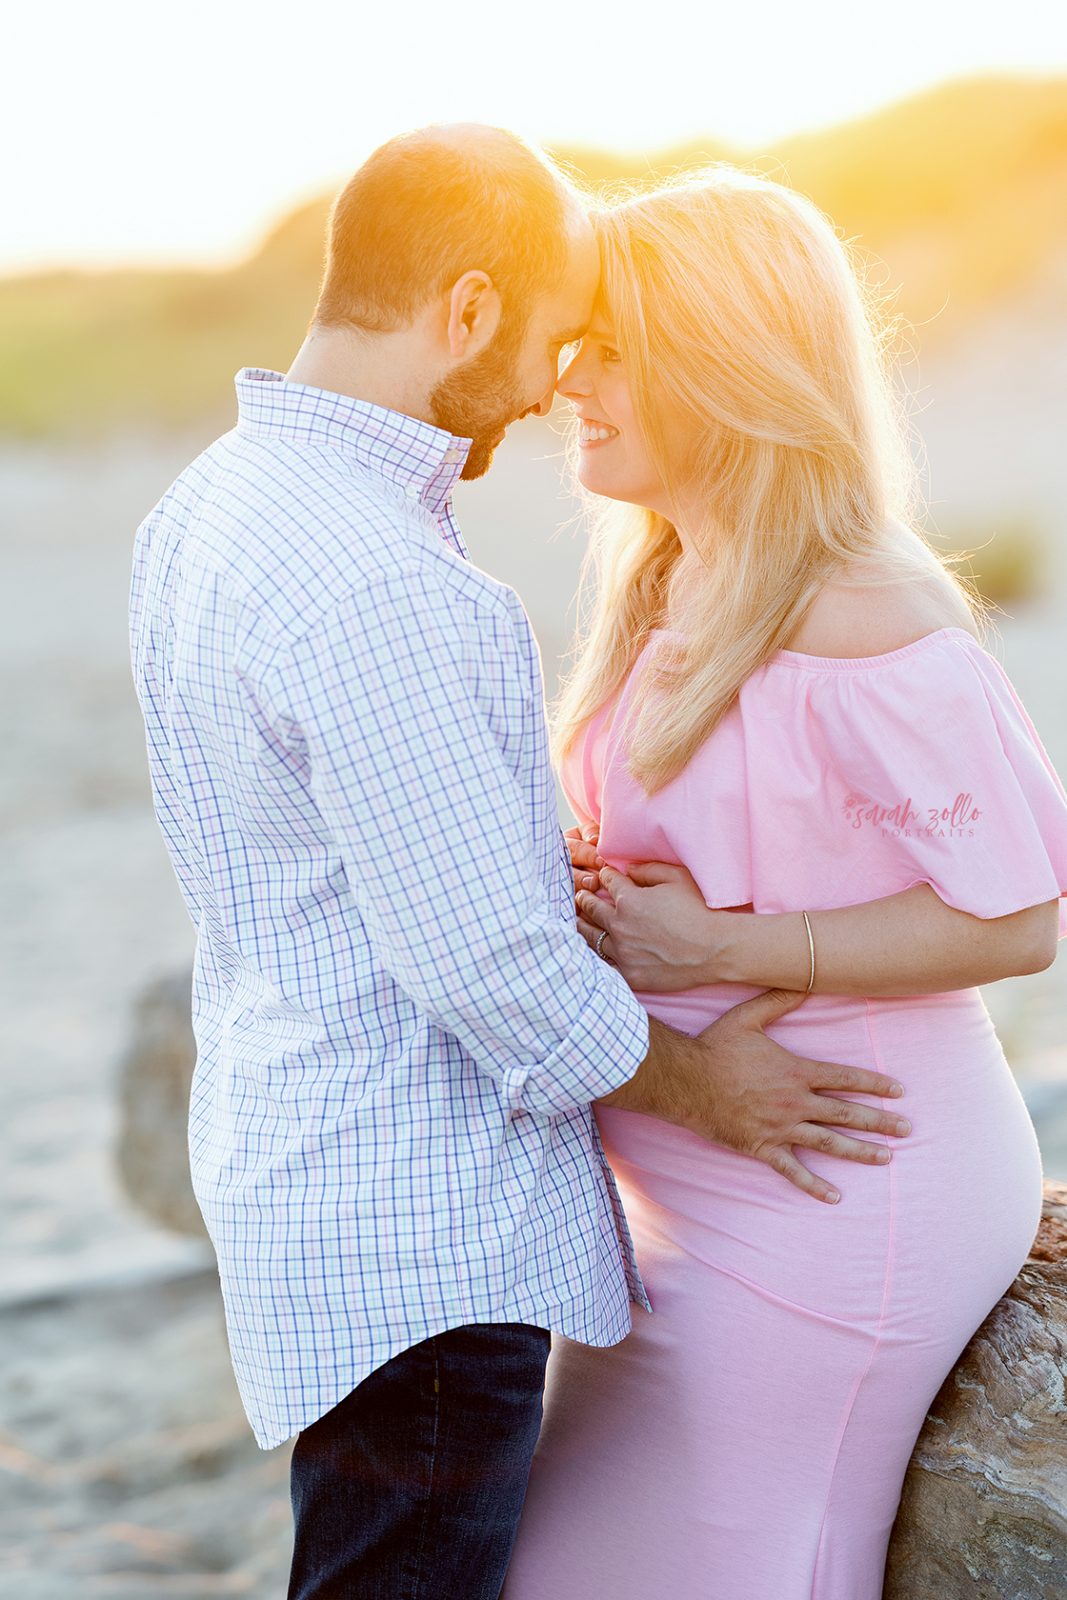 Maternity Photography and Beach Photo Session | Watch Hill, Napatree Point, Westerly, RI - Husband and wife having a moment